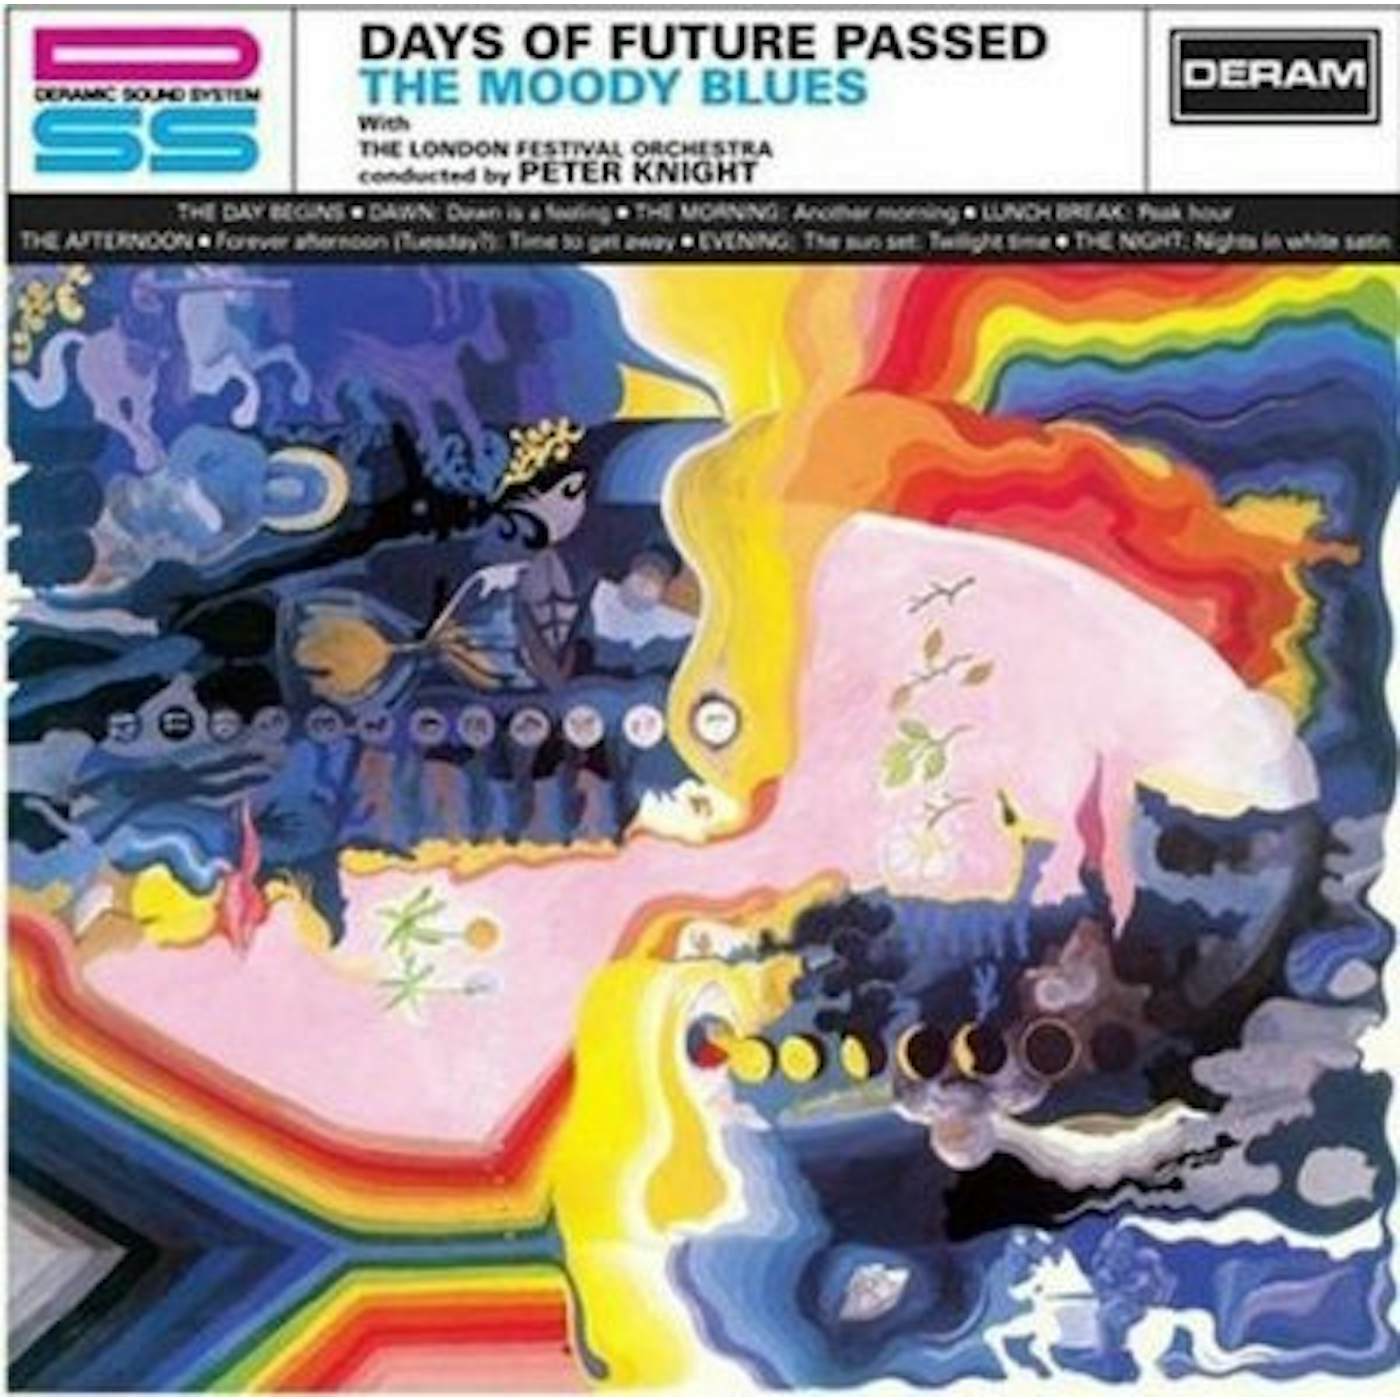 The Moody Blues DAYS OF FUTURE PASSED CD